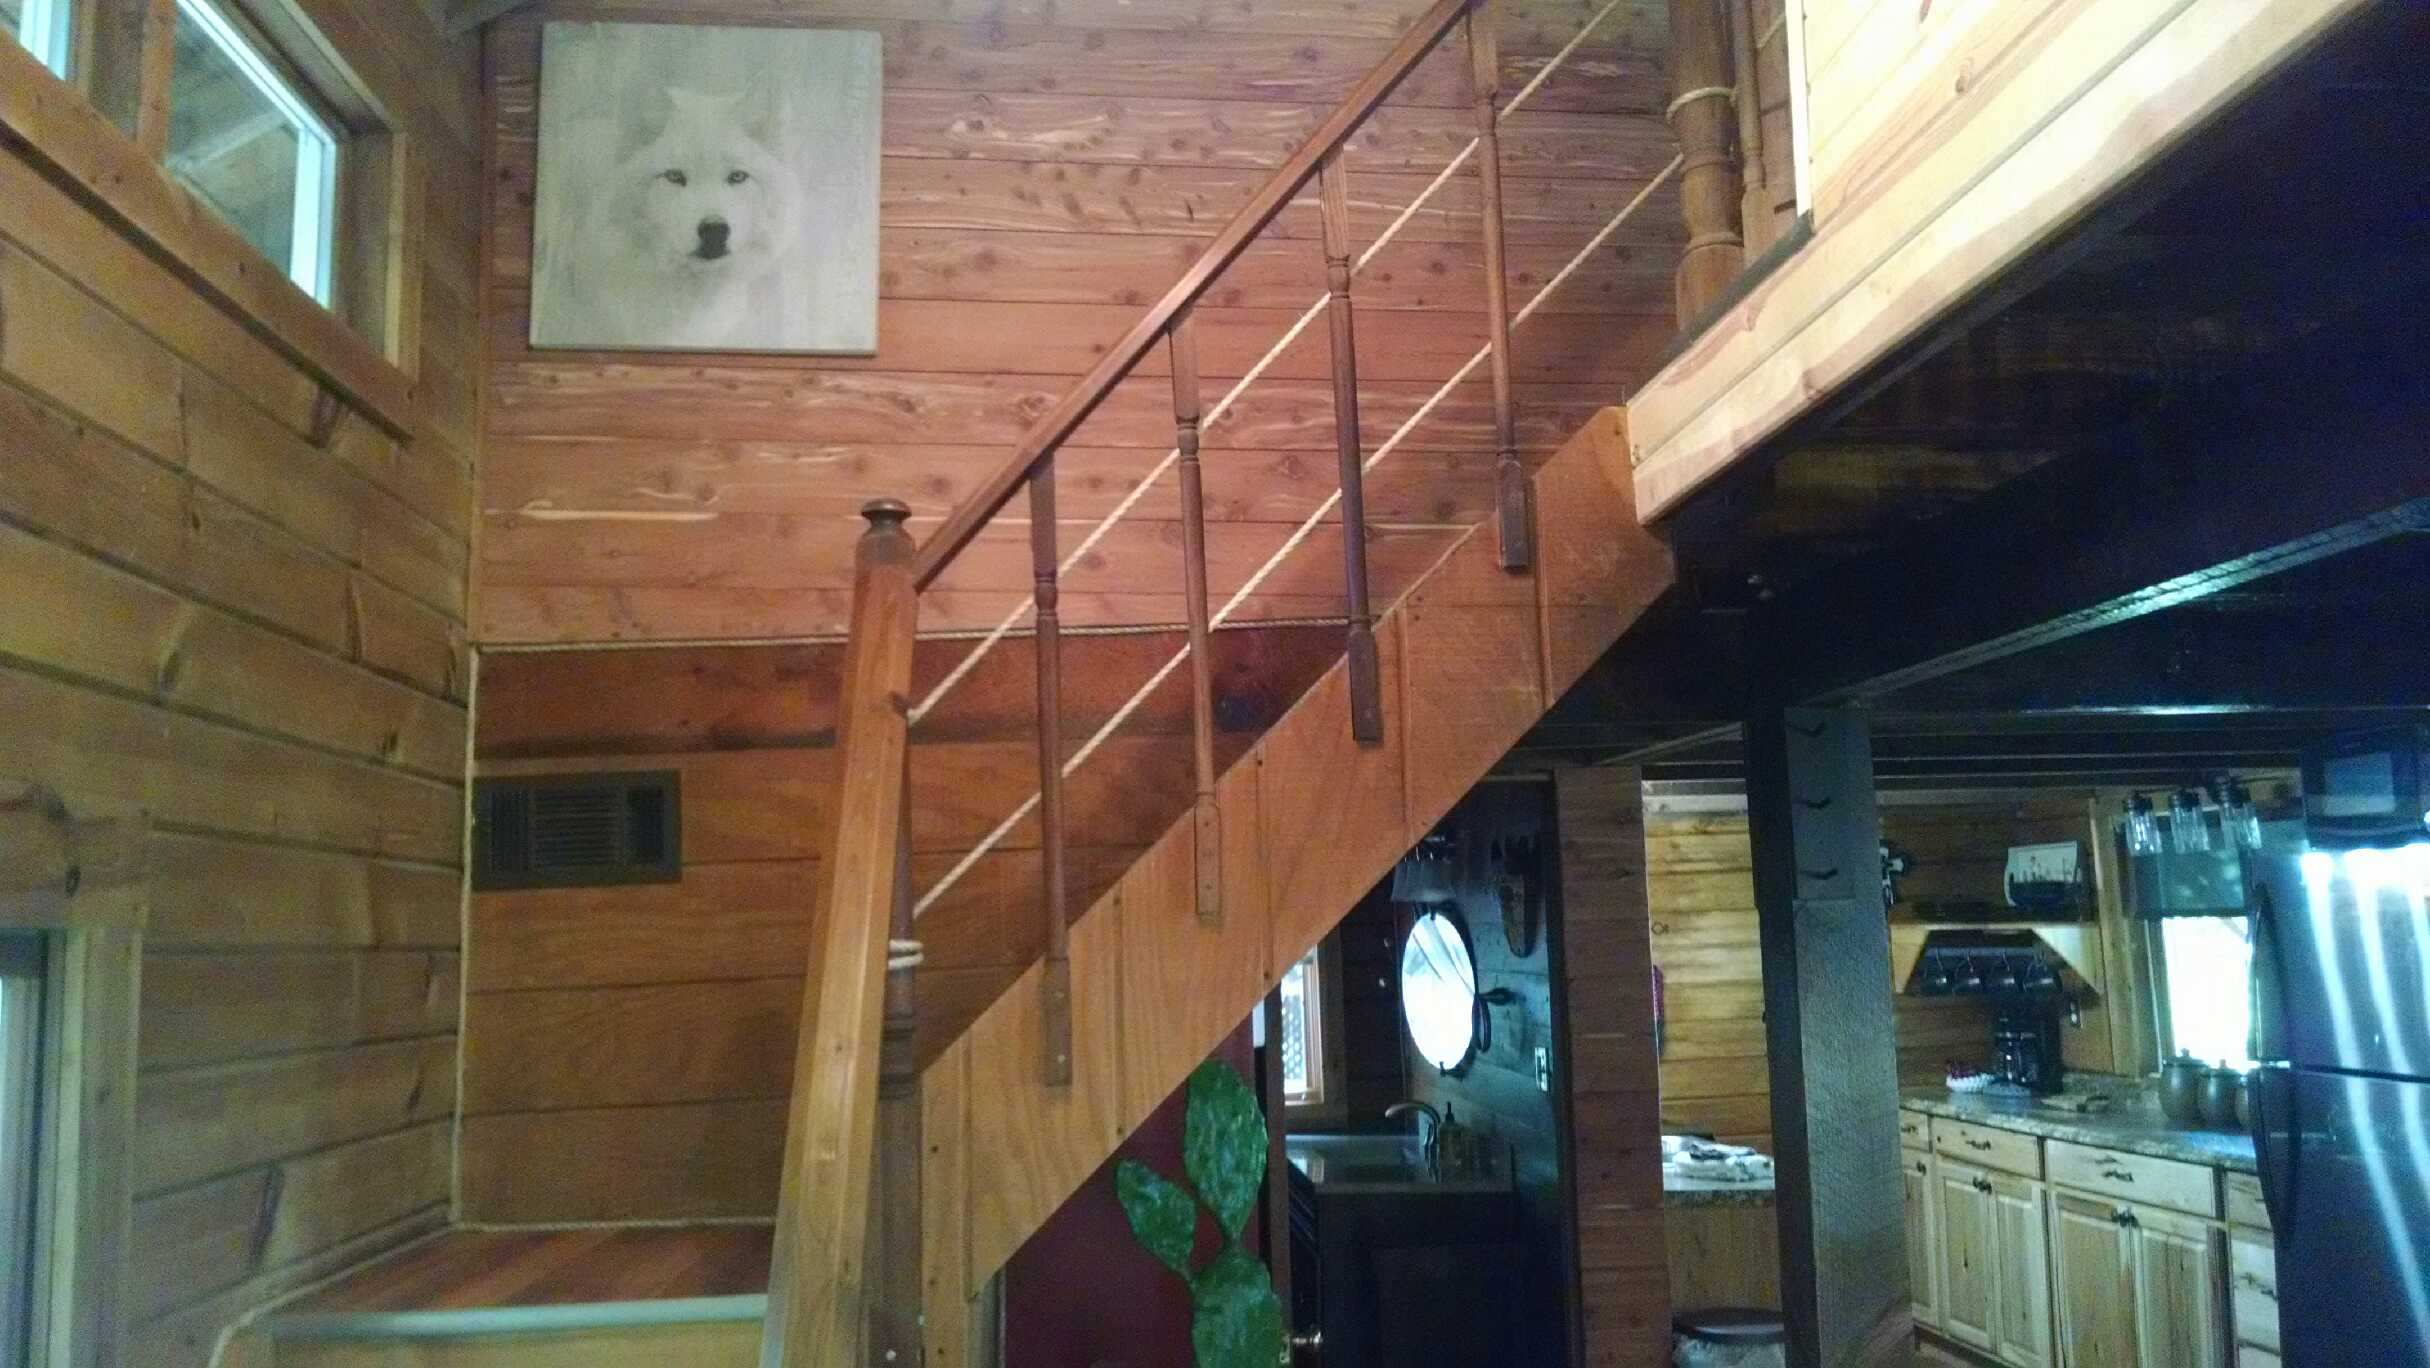 stairs to loft